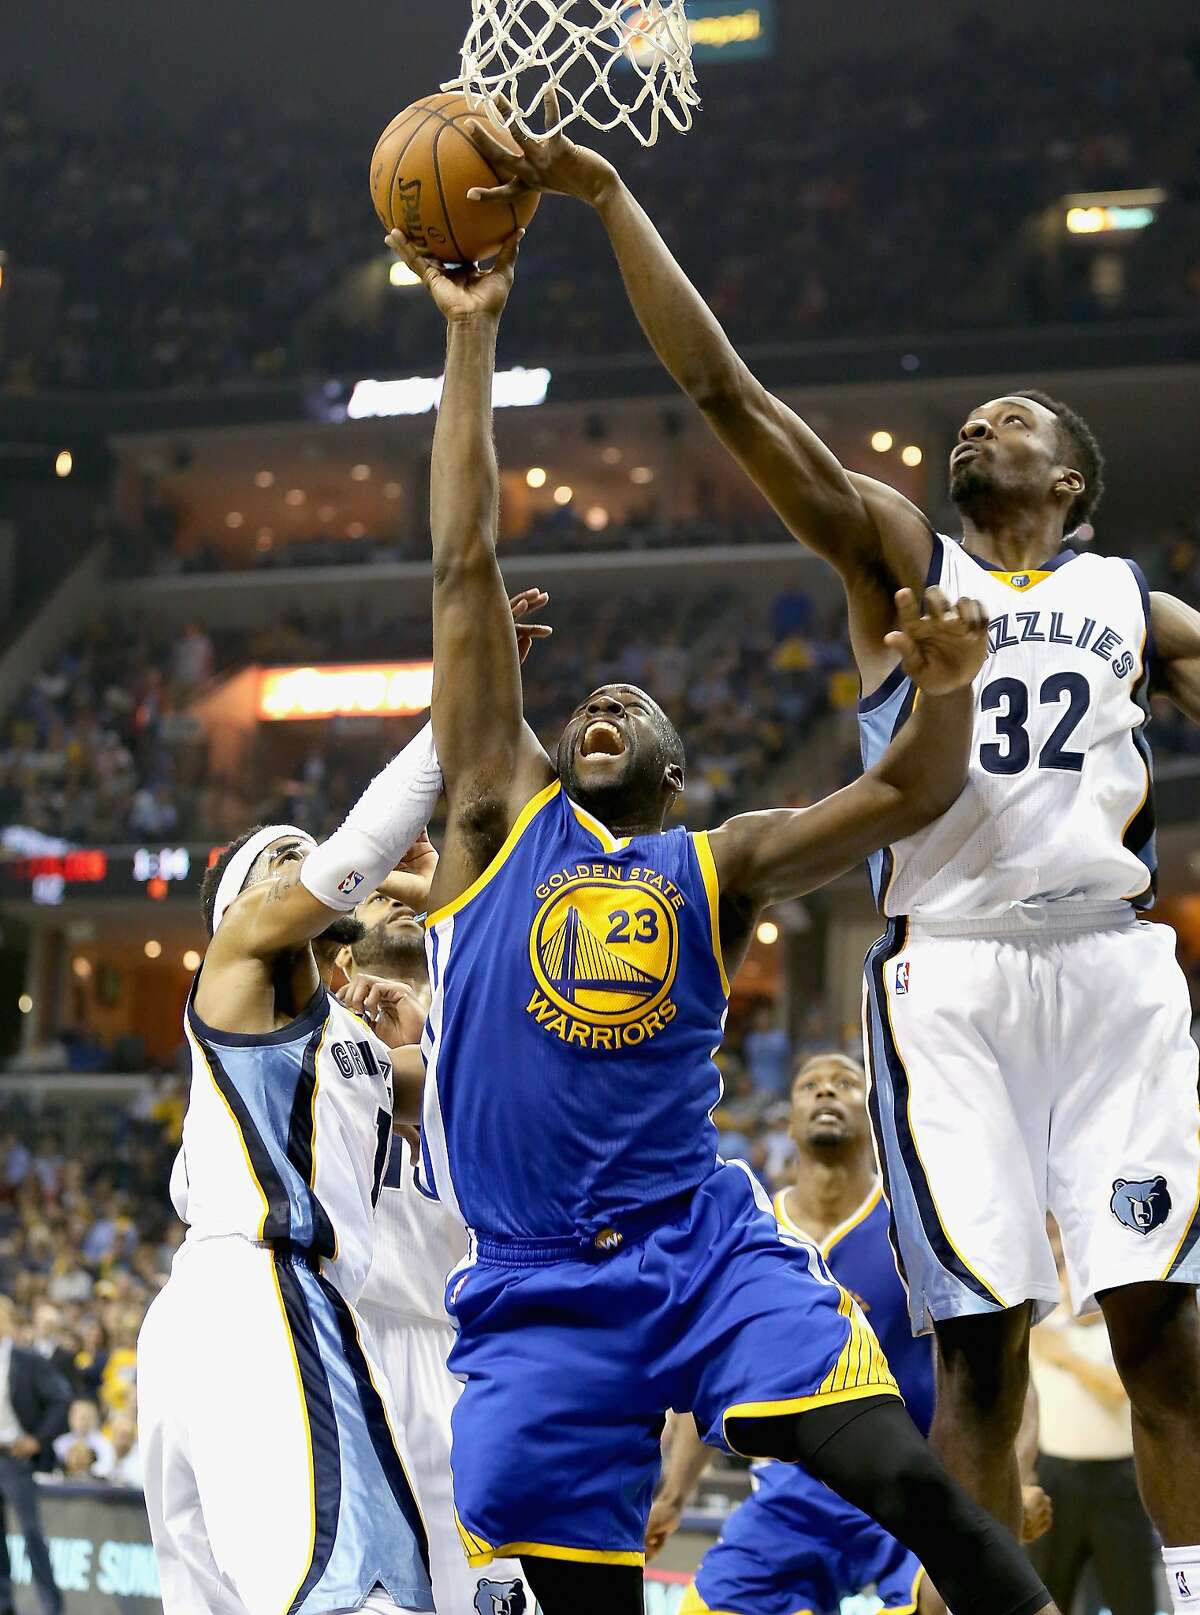 MEMPHIS, TN - MAY 15: Draymond Green #23 of the Golden State Warriors shoots the ball against the Memphis Grizzlies during Game six of the Western Conference Semifinals of the 2015 NBA Playoffs at FedExForum on May 15, 2015 in Memphis, Tennessee. NOTE TO USER: User expressly acknowledges and agrees that, by downloading and or using this photograph, User is consenting to the terms and conditions of the Getty Images License Agreement (Photo by Andy Lyons/Getty Images)